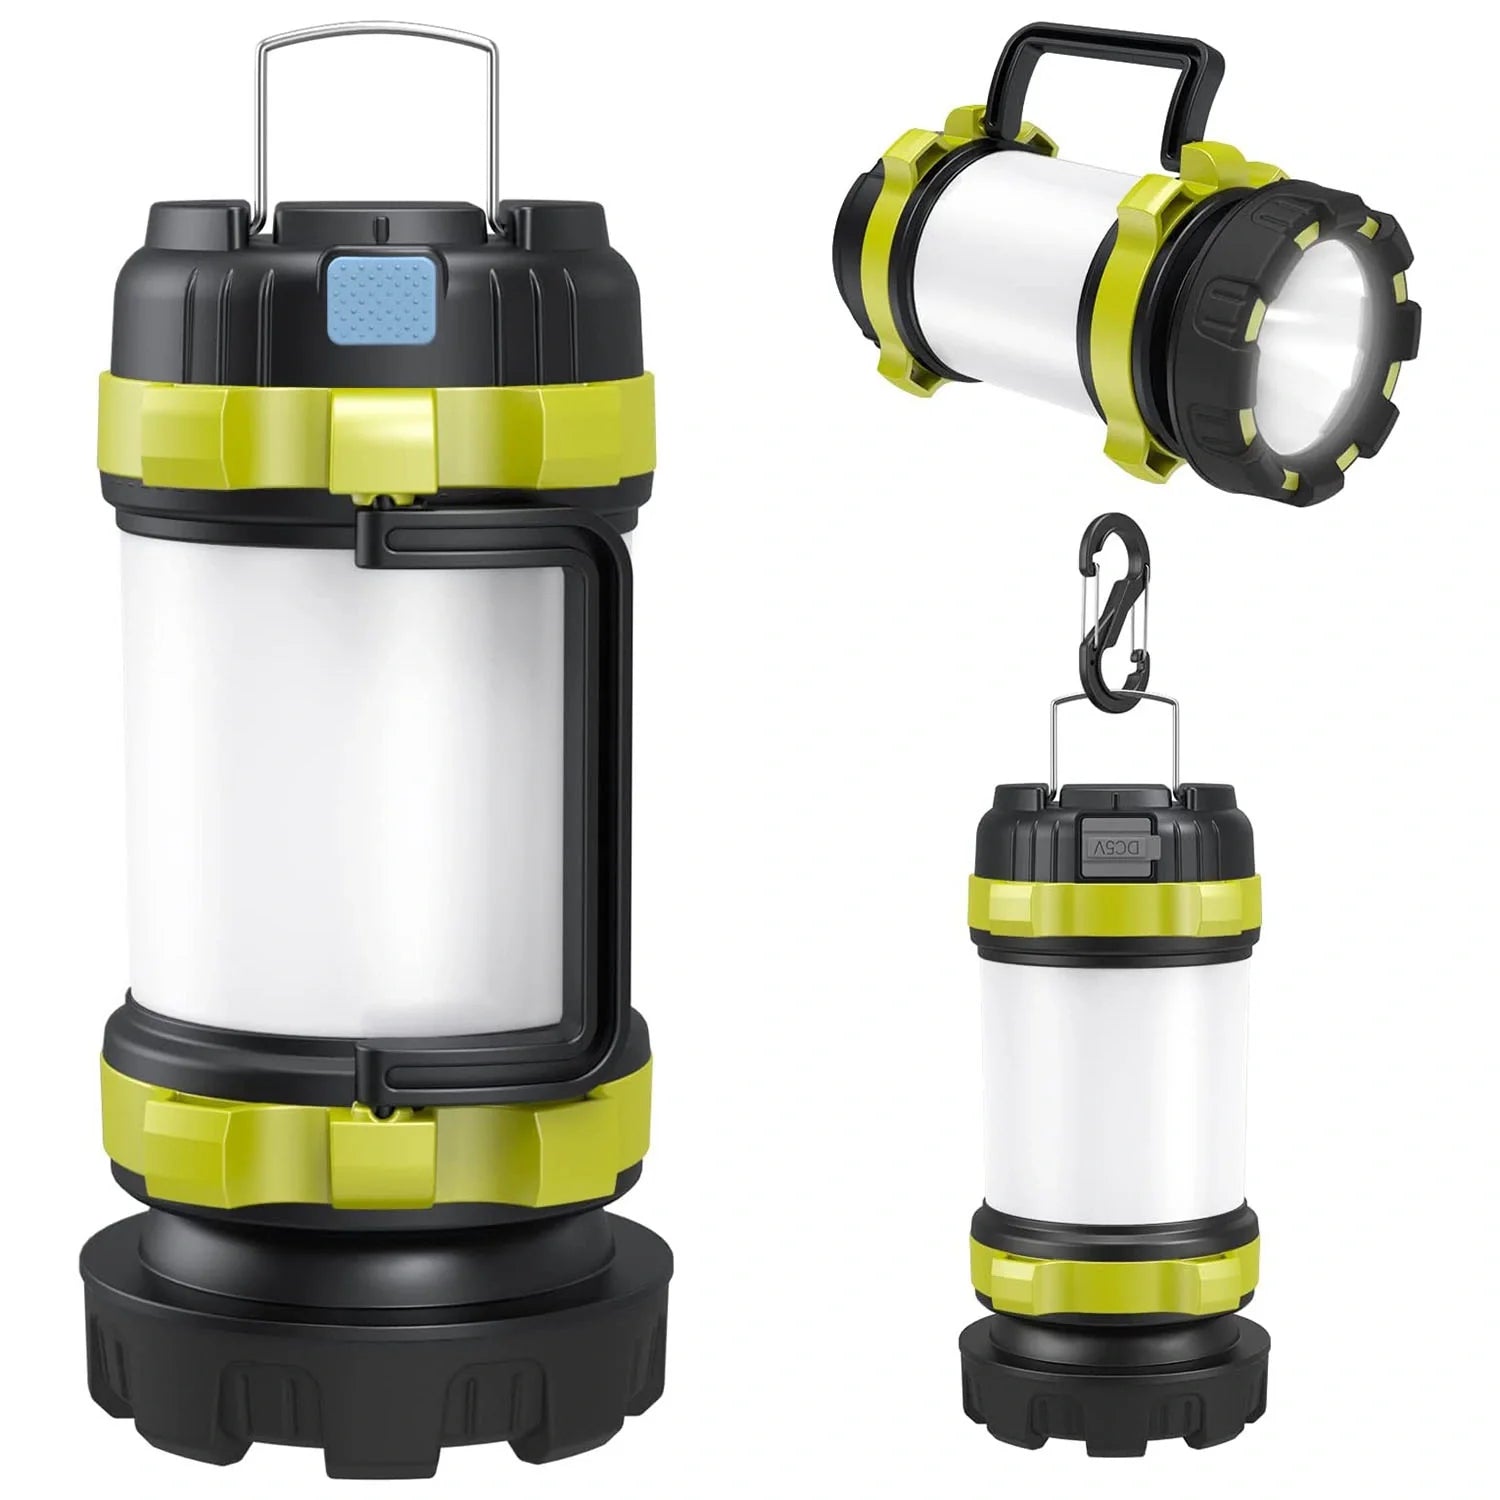 Outdoor Camping Lantern - Emergency Light 6 Lighting Modes Rechargeable Outdoor Activities Camping, Hiking, Lantern (2Pcs)